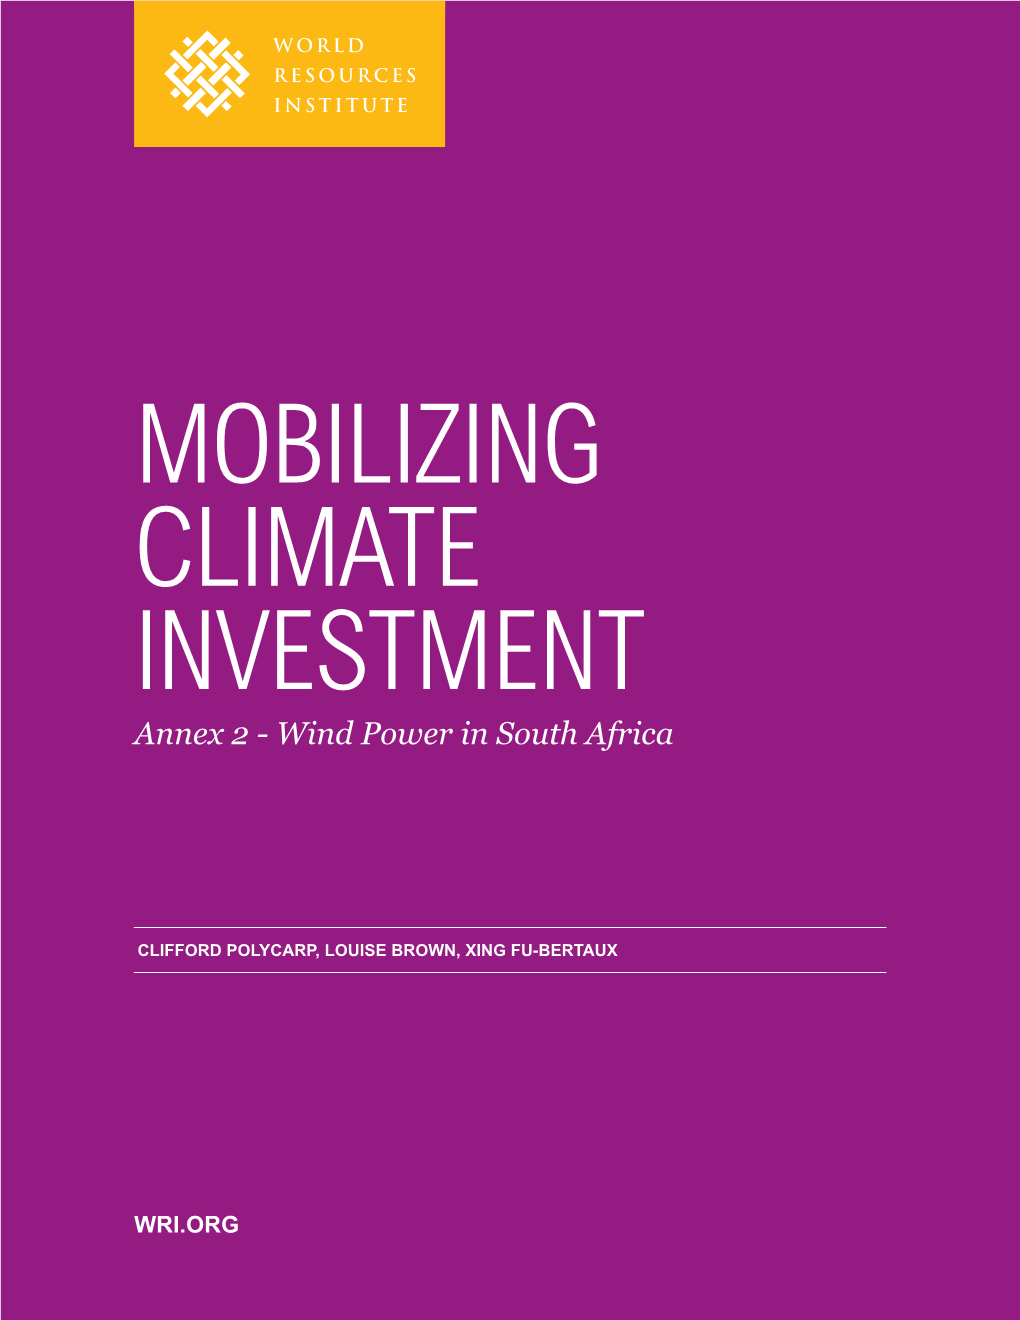 MOBILIZING CLIMATE INVESTMENT Annex 2 - Wind Power in South Africa